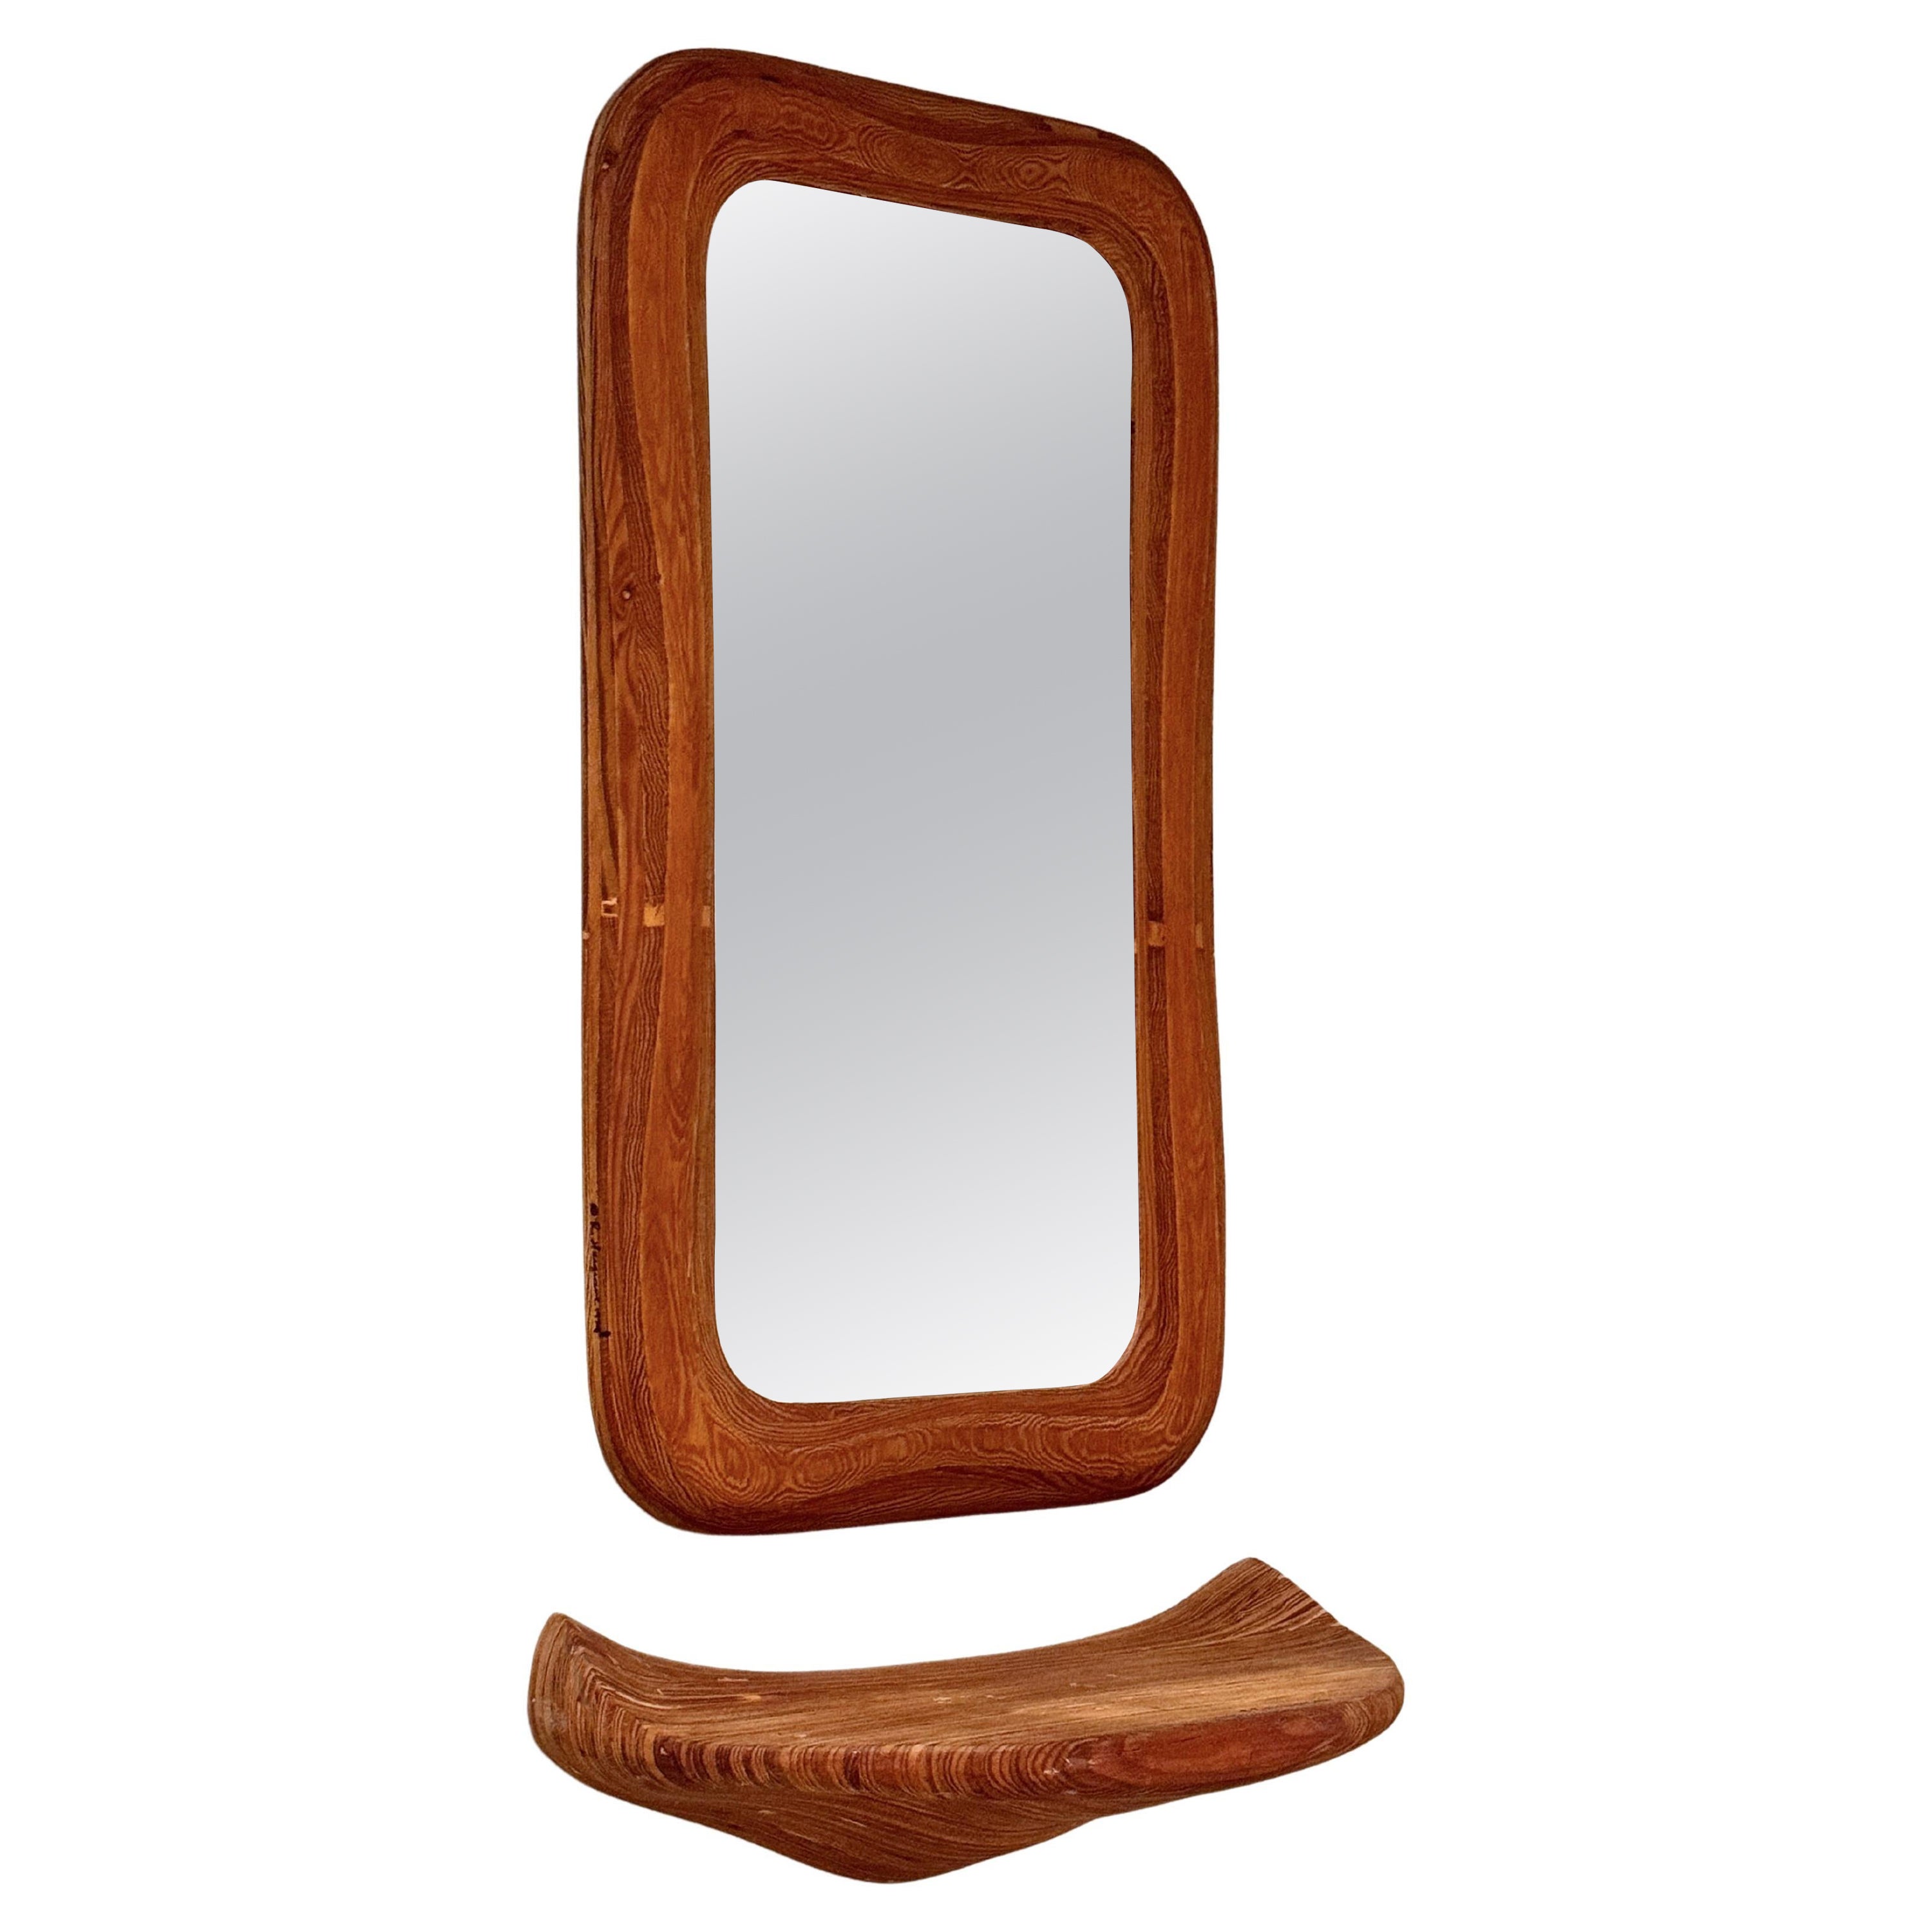 American Studio Craft Sculptural Wood Wall Shelf and Mirror by Robert Hargrave